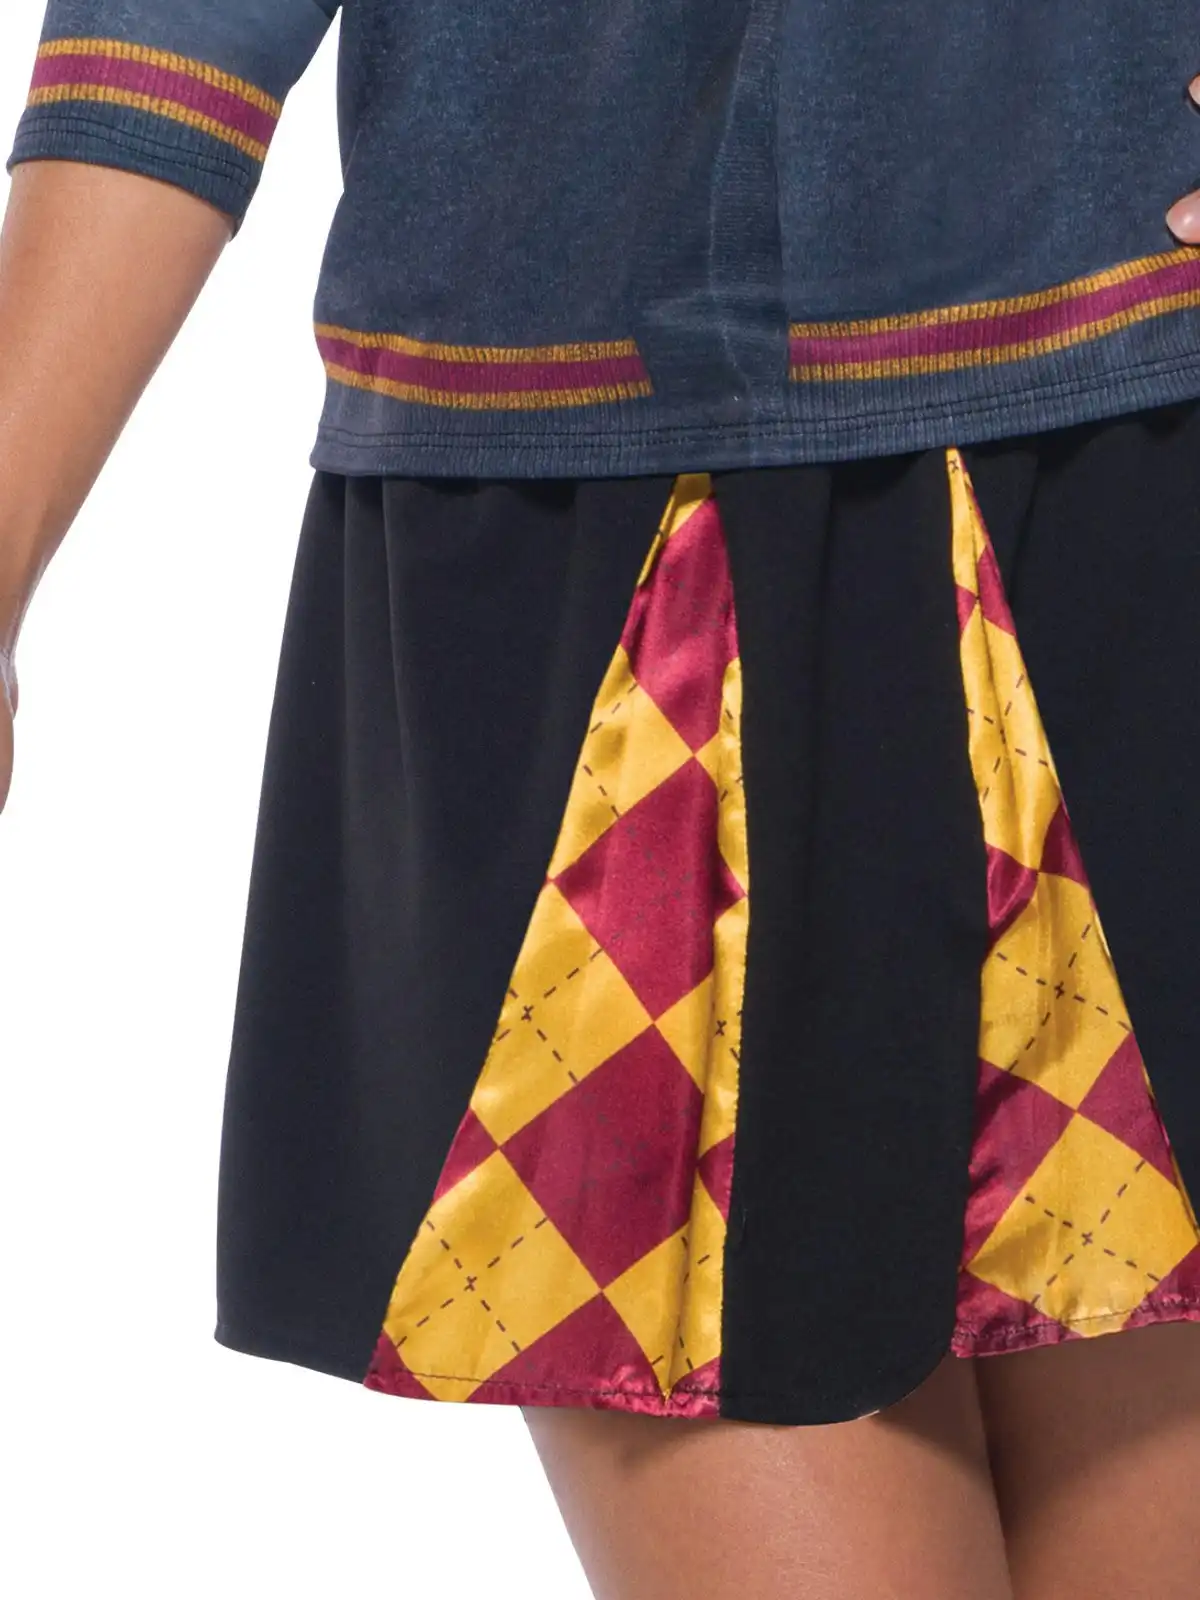 Harry Potter Gryffindor Teen/Adult Skirt Dress Up Party Costume Womens One Size